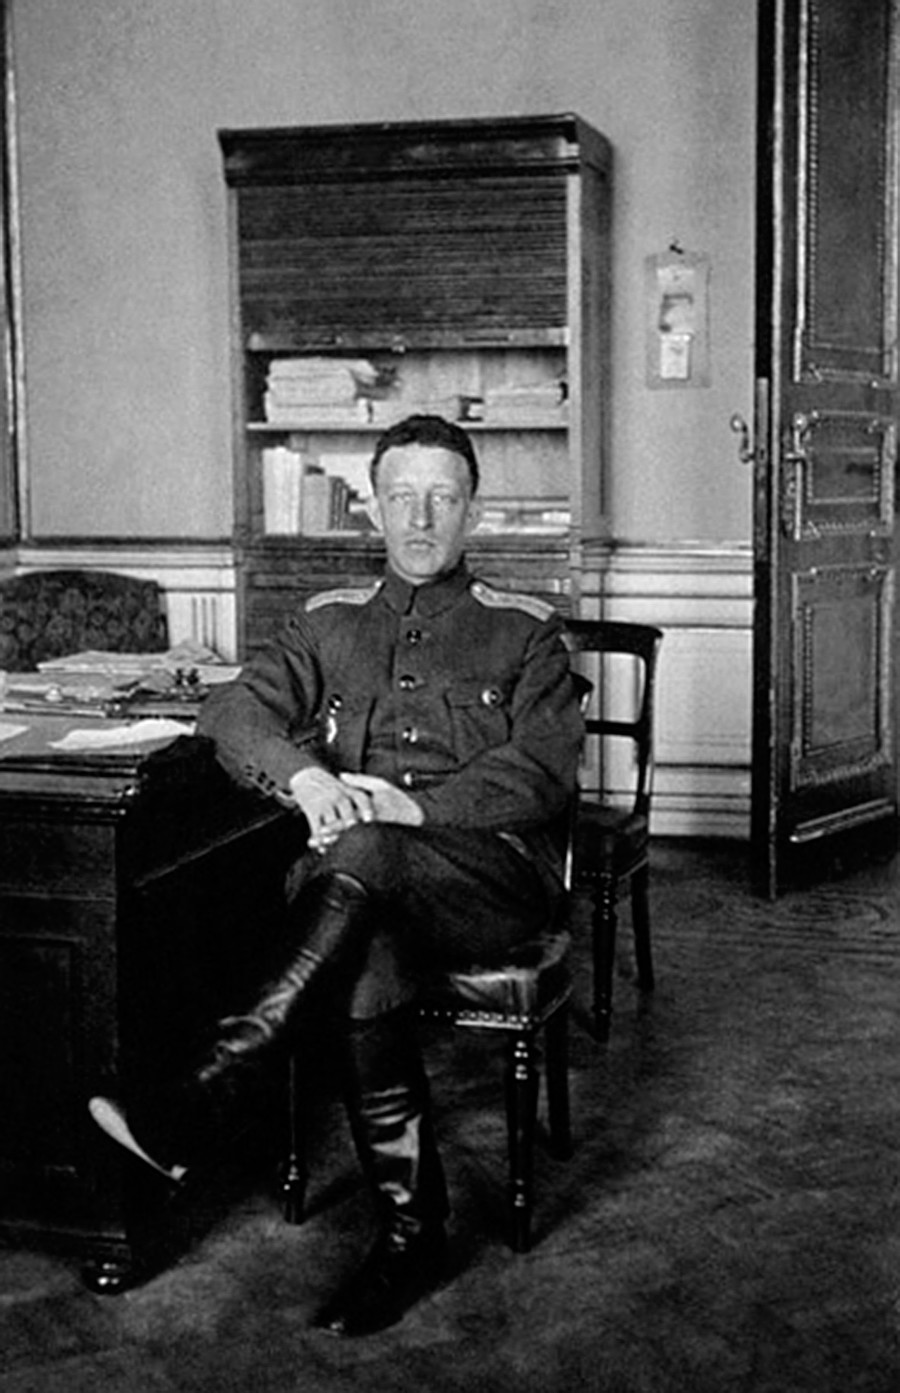 Alexander Blok during his service in the Extraordinary Investigation Commission of Provisional government